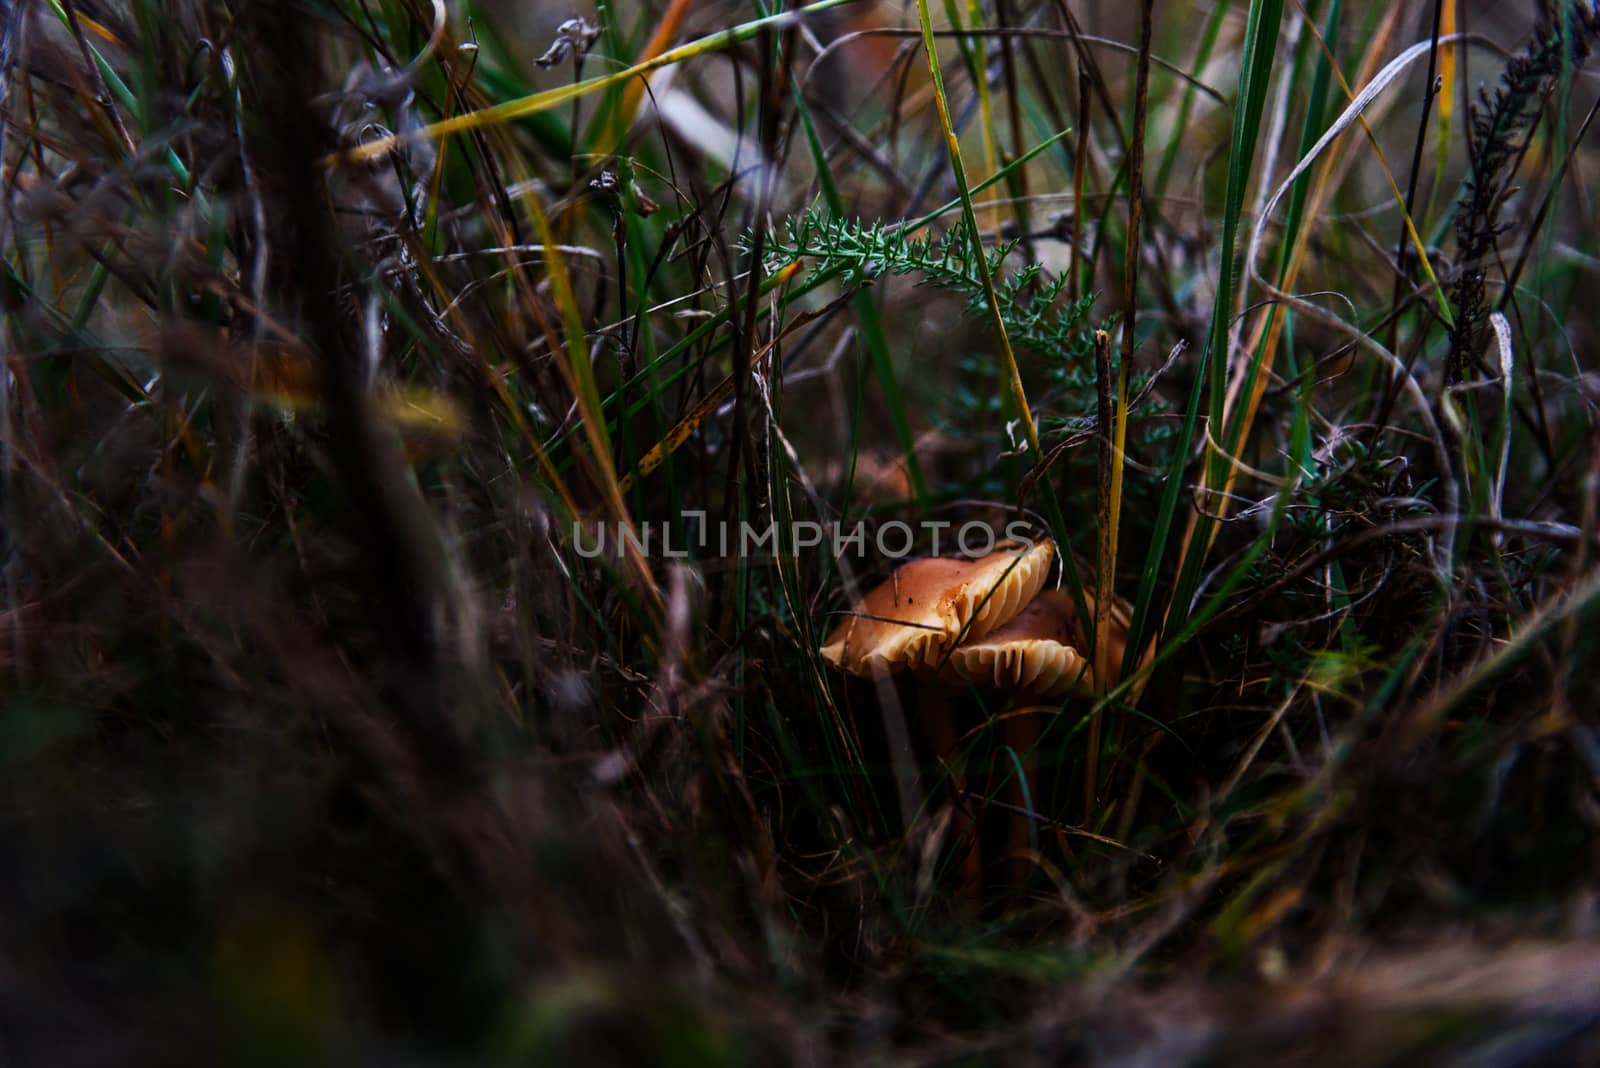 Two little Yellow Mushrooms In The Grass by WolfWilhelm